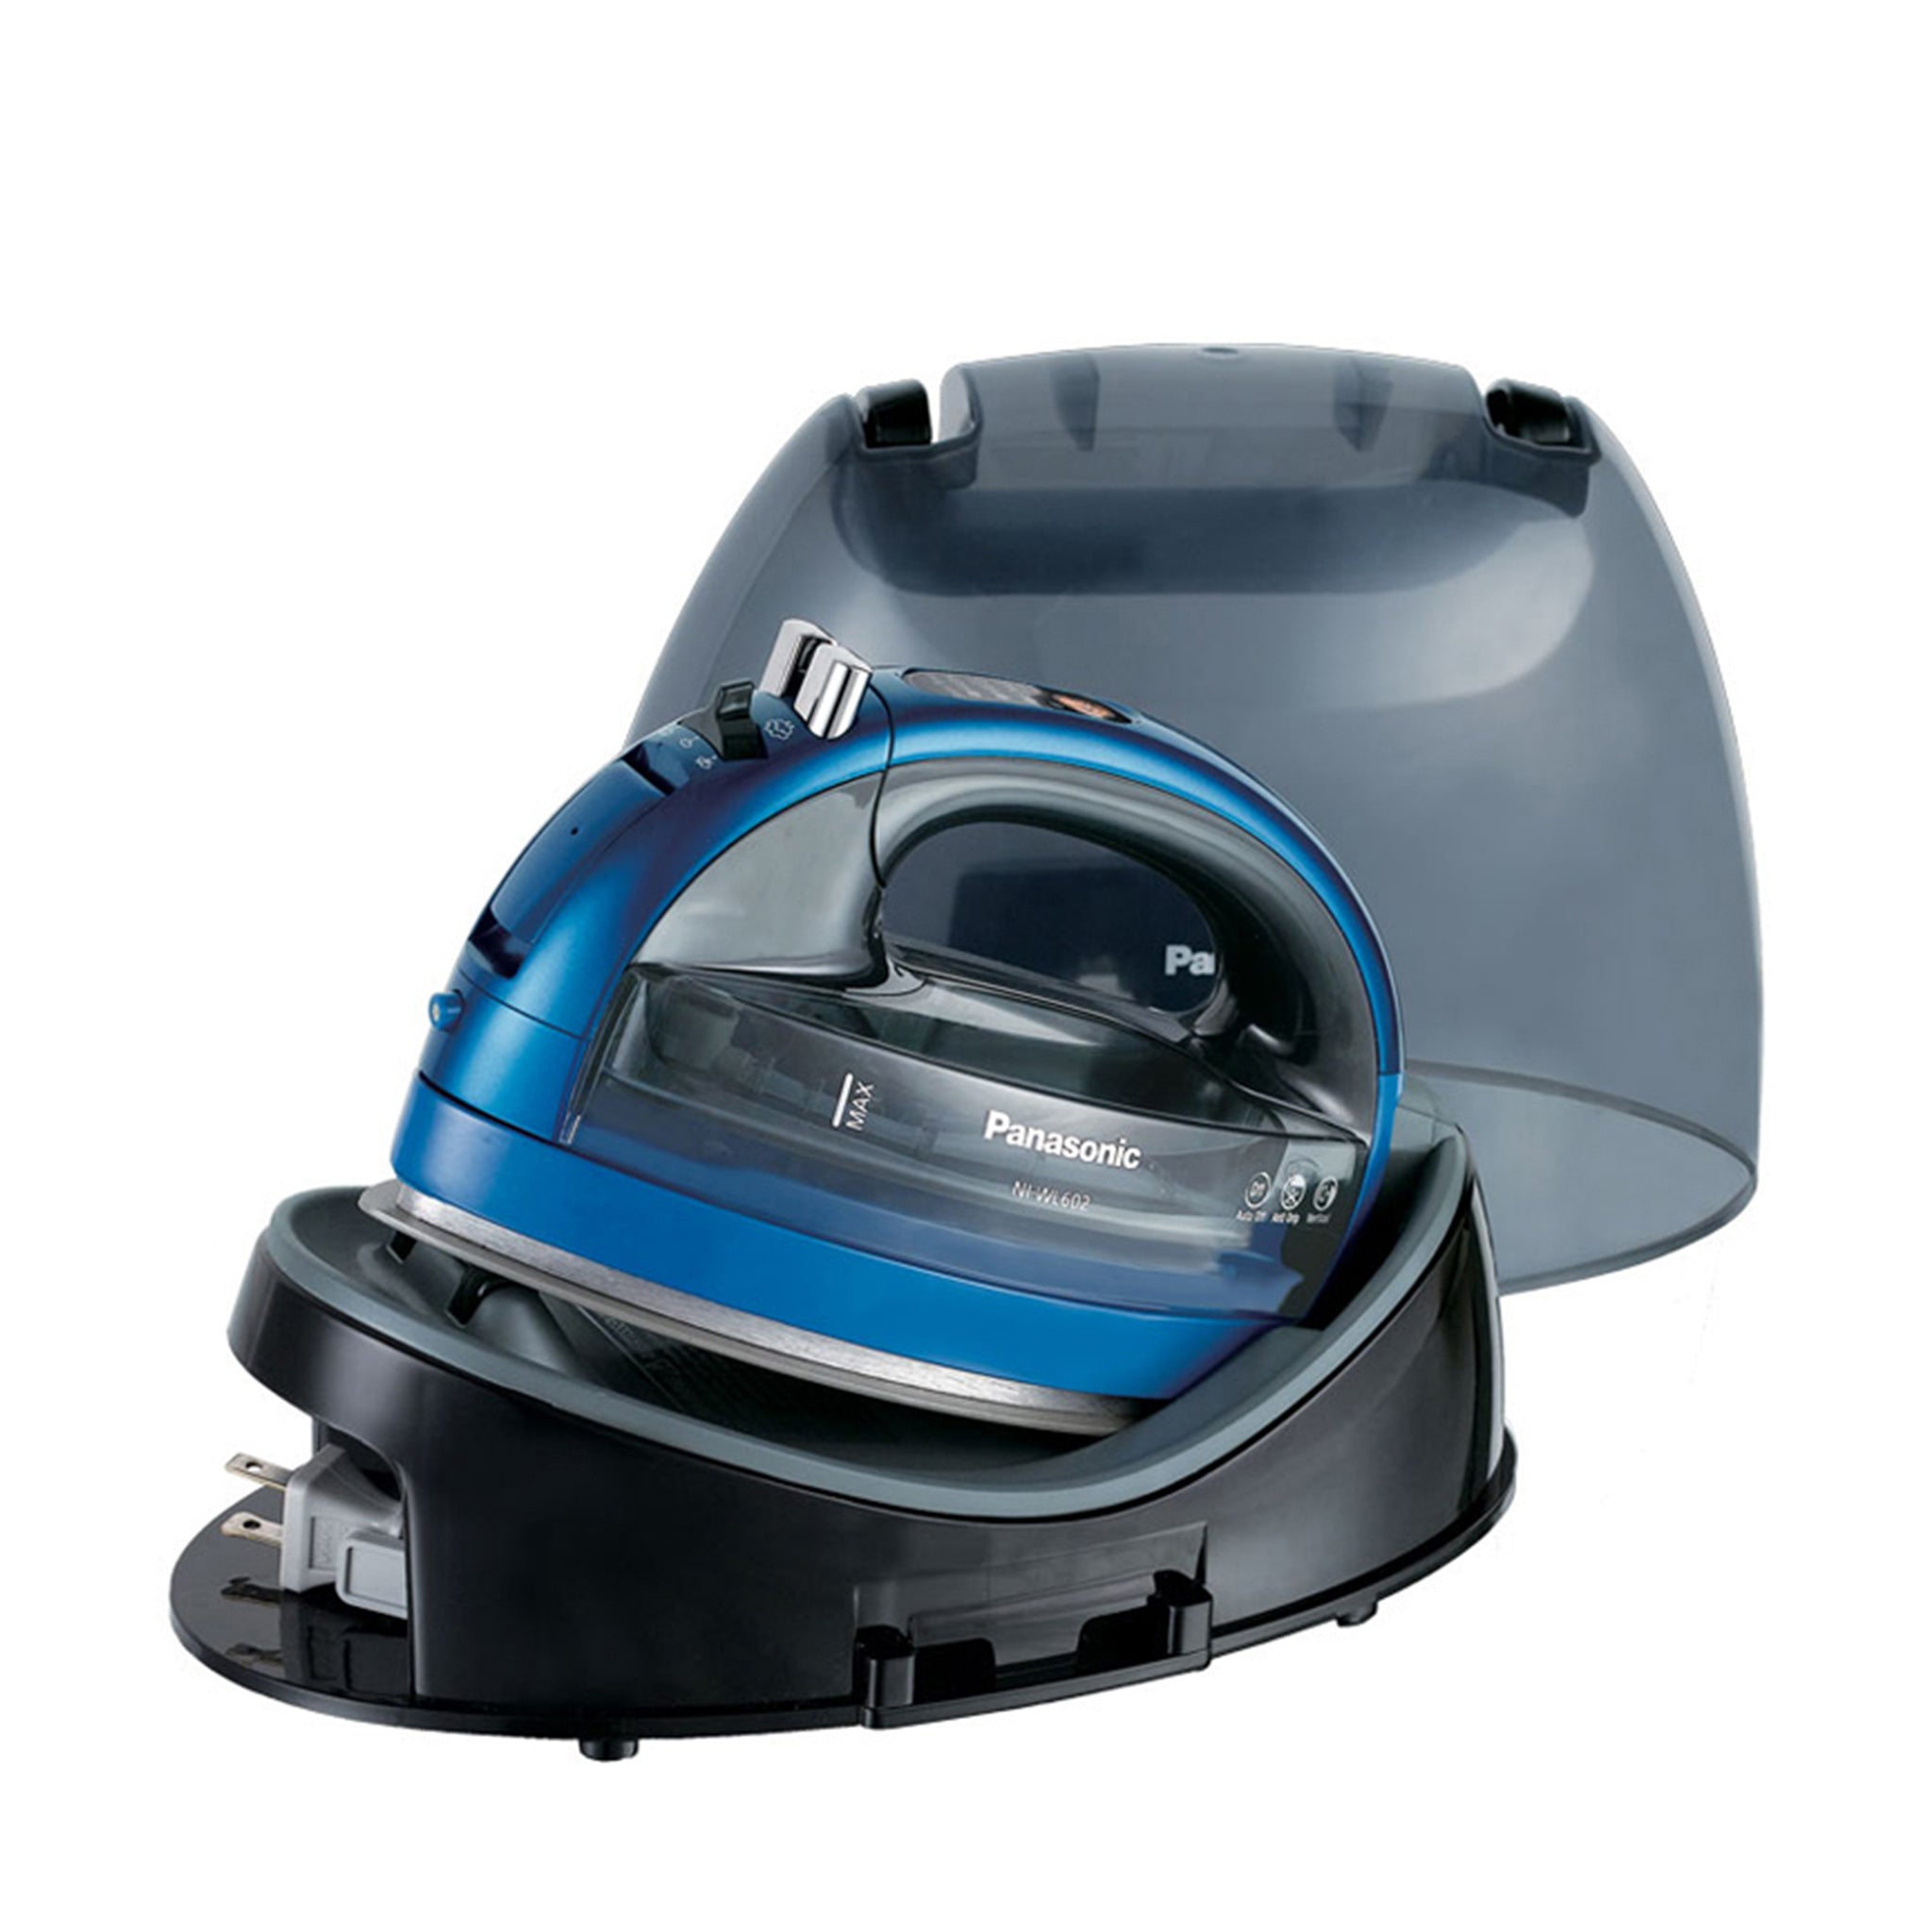 Panasonic 360-Degree Freestyle Cordless Steam/Dry Iron, 1500W,  Precision-Tipped Stainless Steel Soleplate - NI-QL1100L